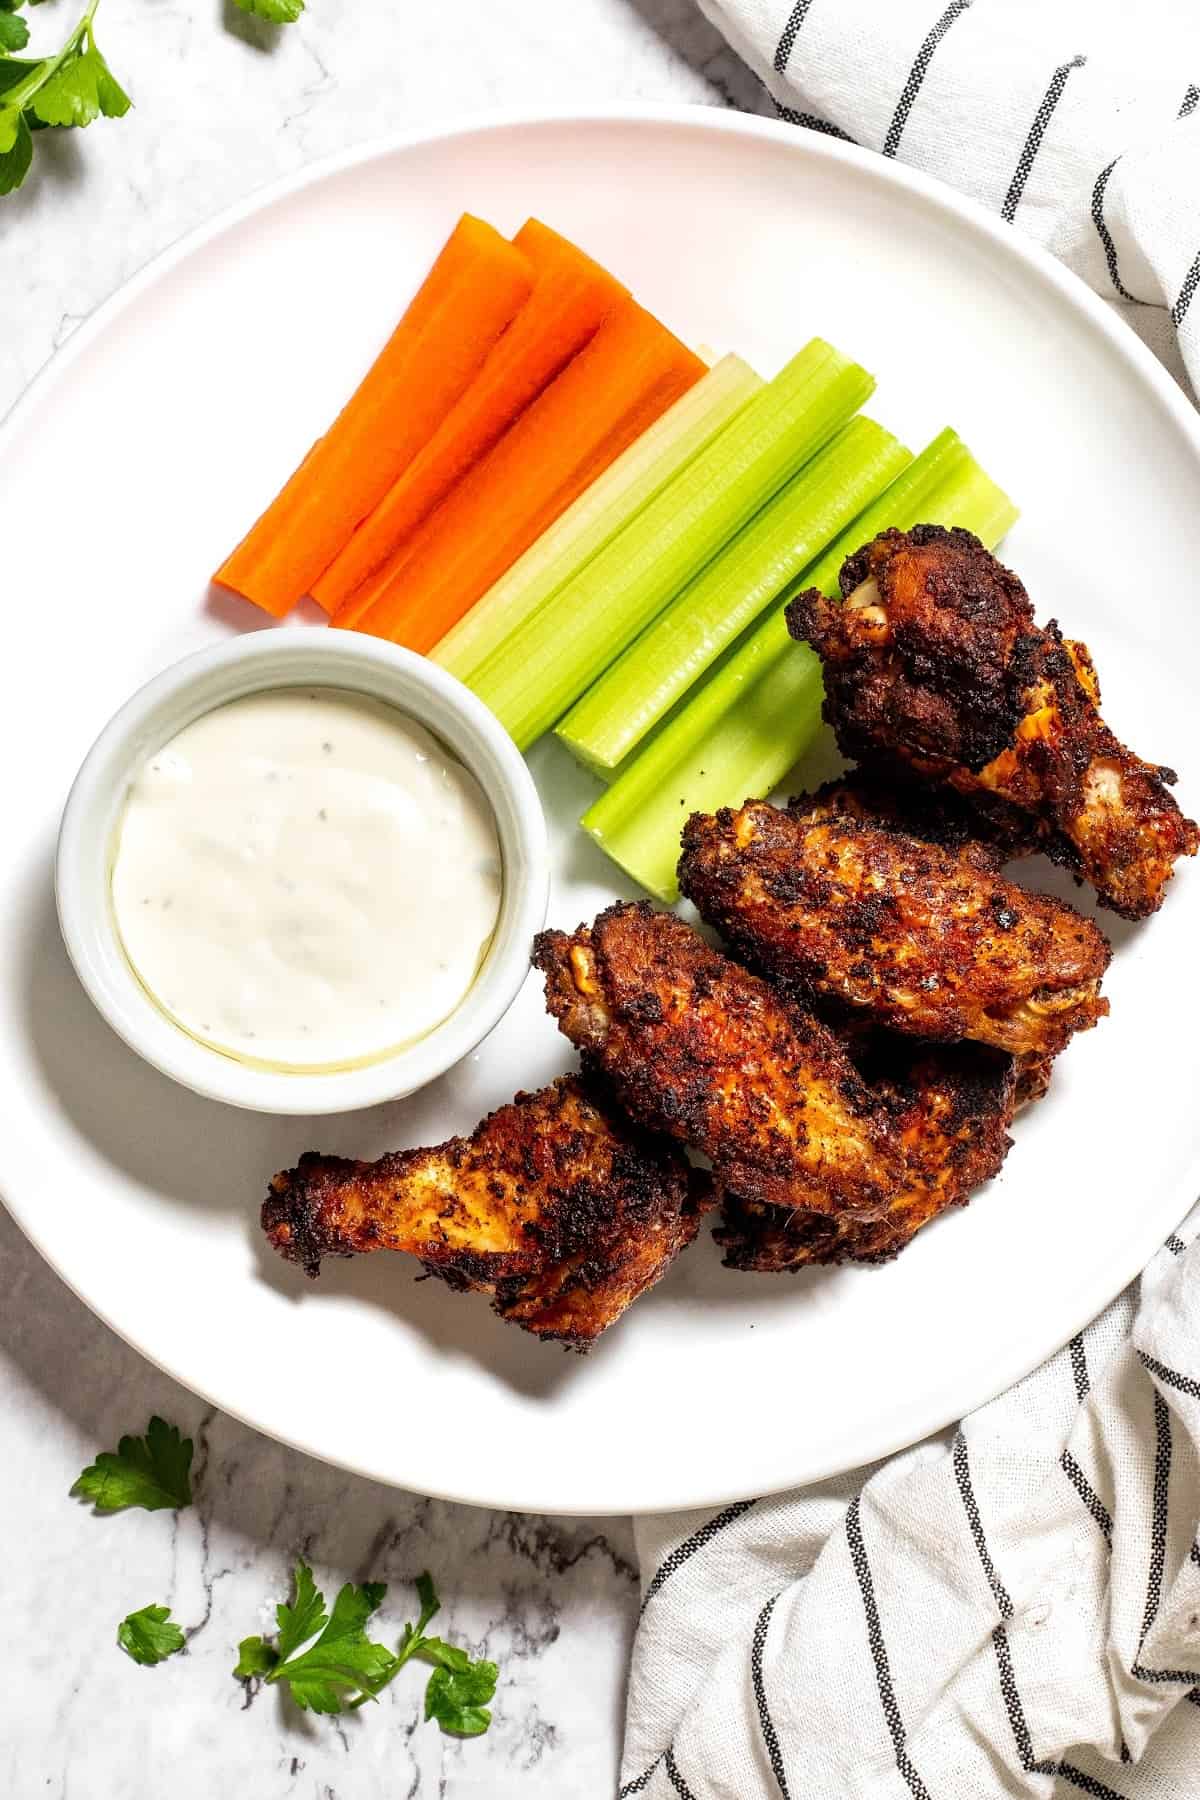 Overhead view of a plate with 4 wings, some celery sticks, some carrot sticks, and a bowl of ranch dressing, next to some parsley and a kitchen towel